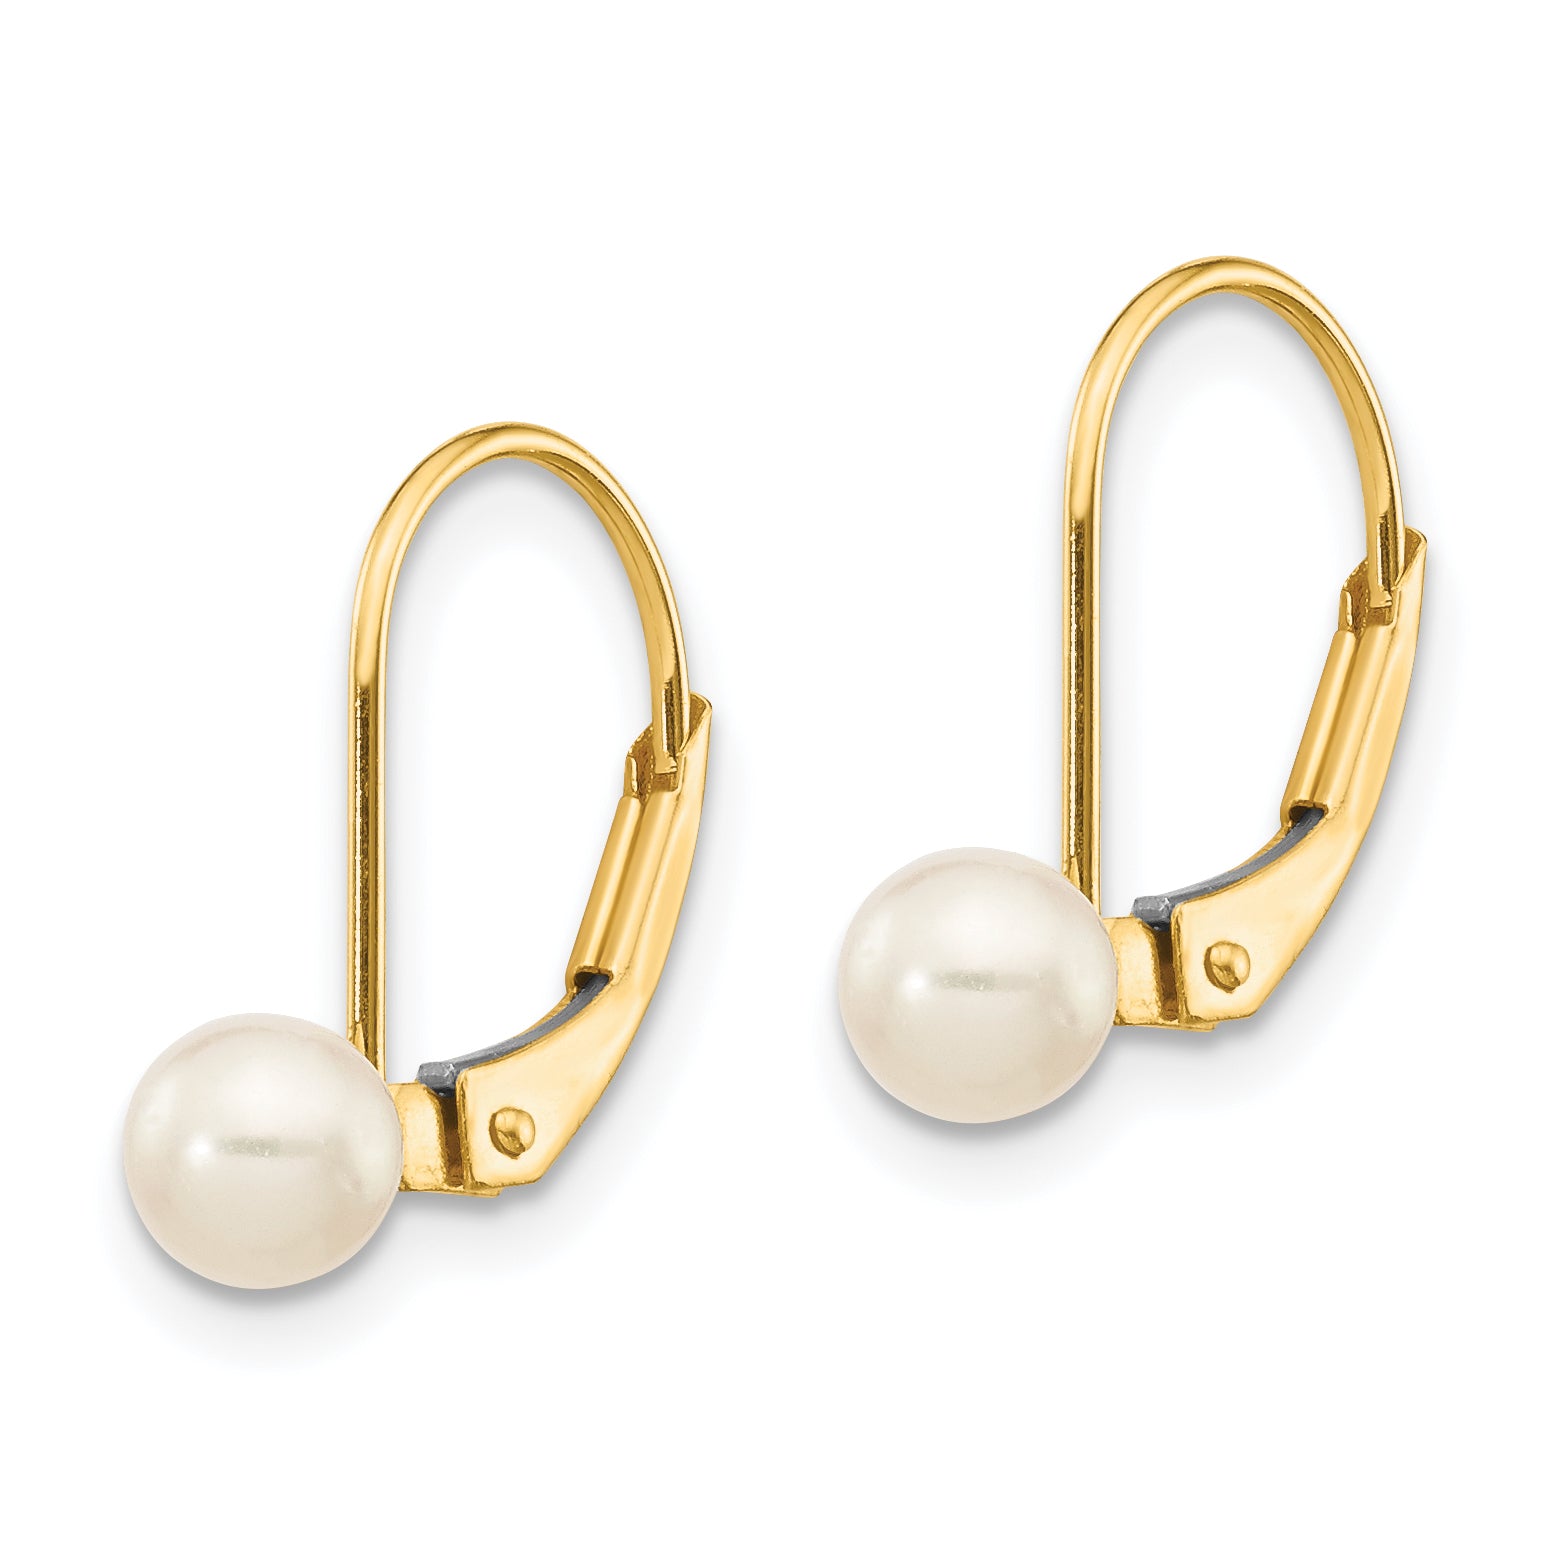 14k 4-5mm White Round Freshwater Cultured Pearl Leverback Earrings